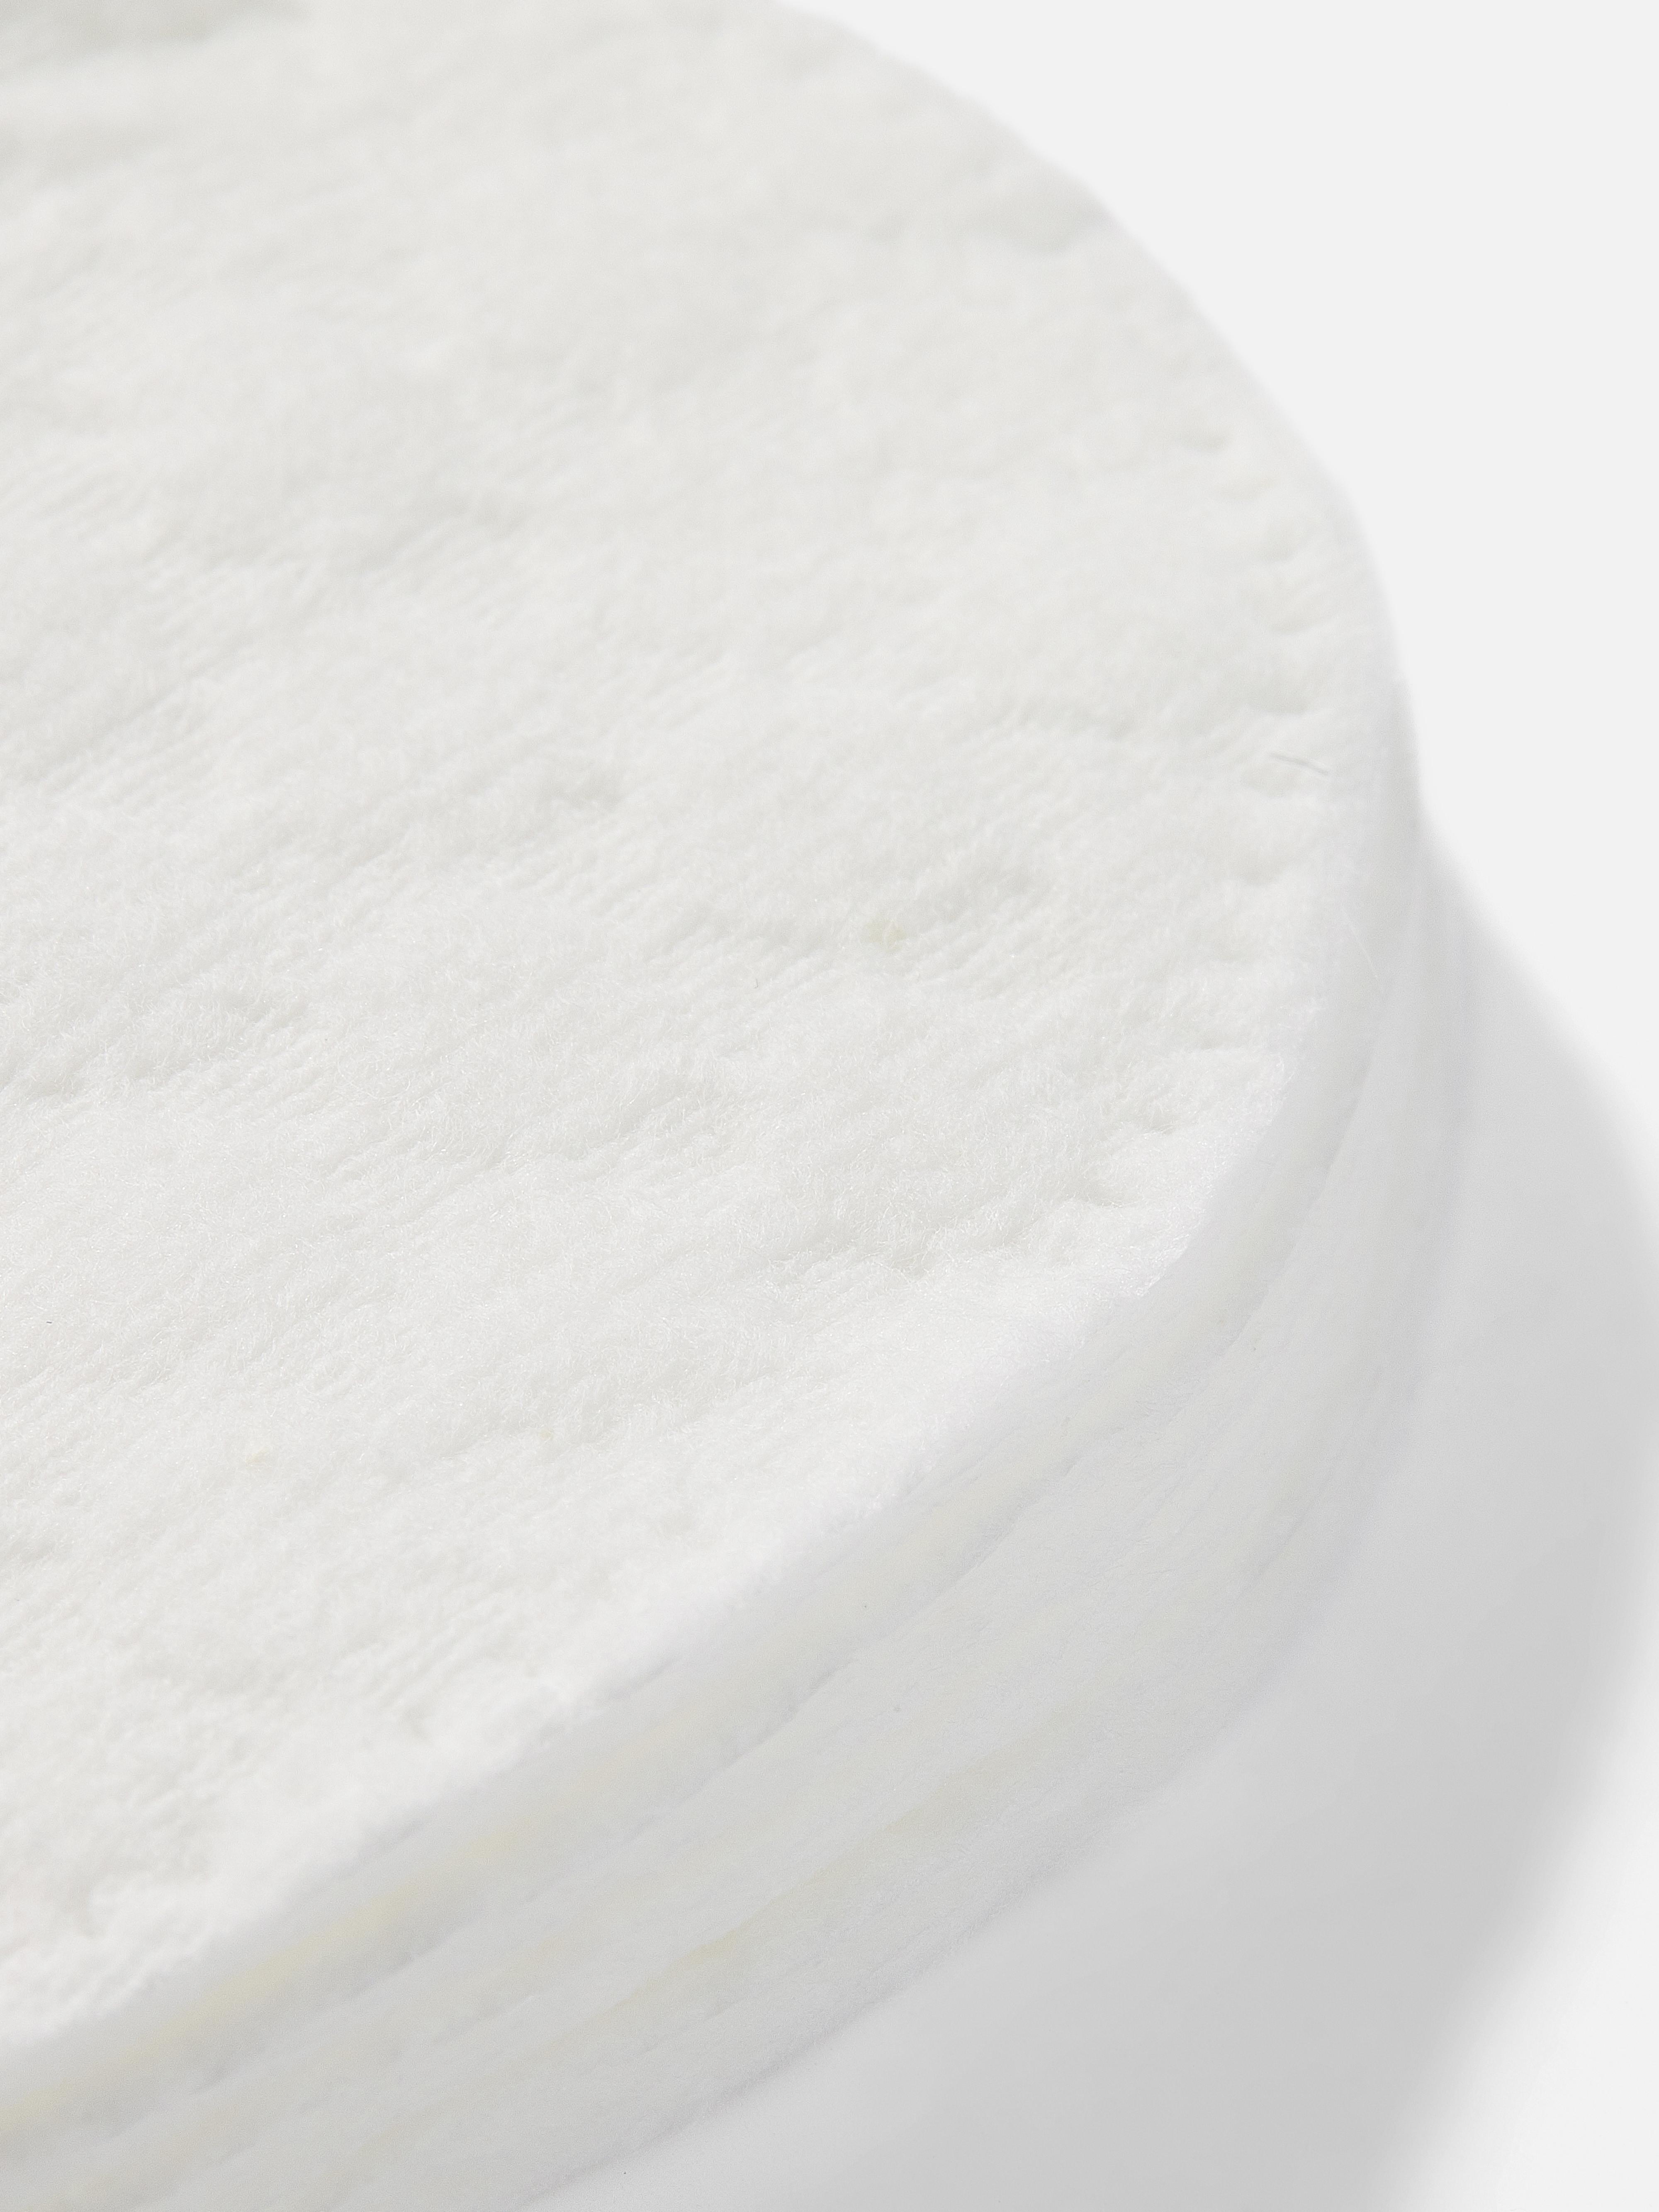 100 Cotton Oval Cosmetic Pads